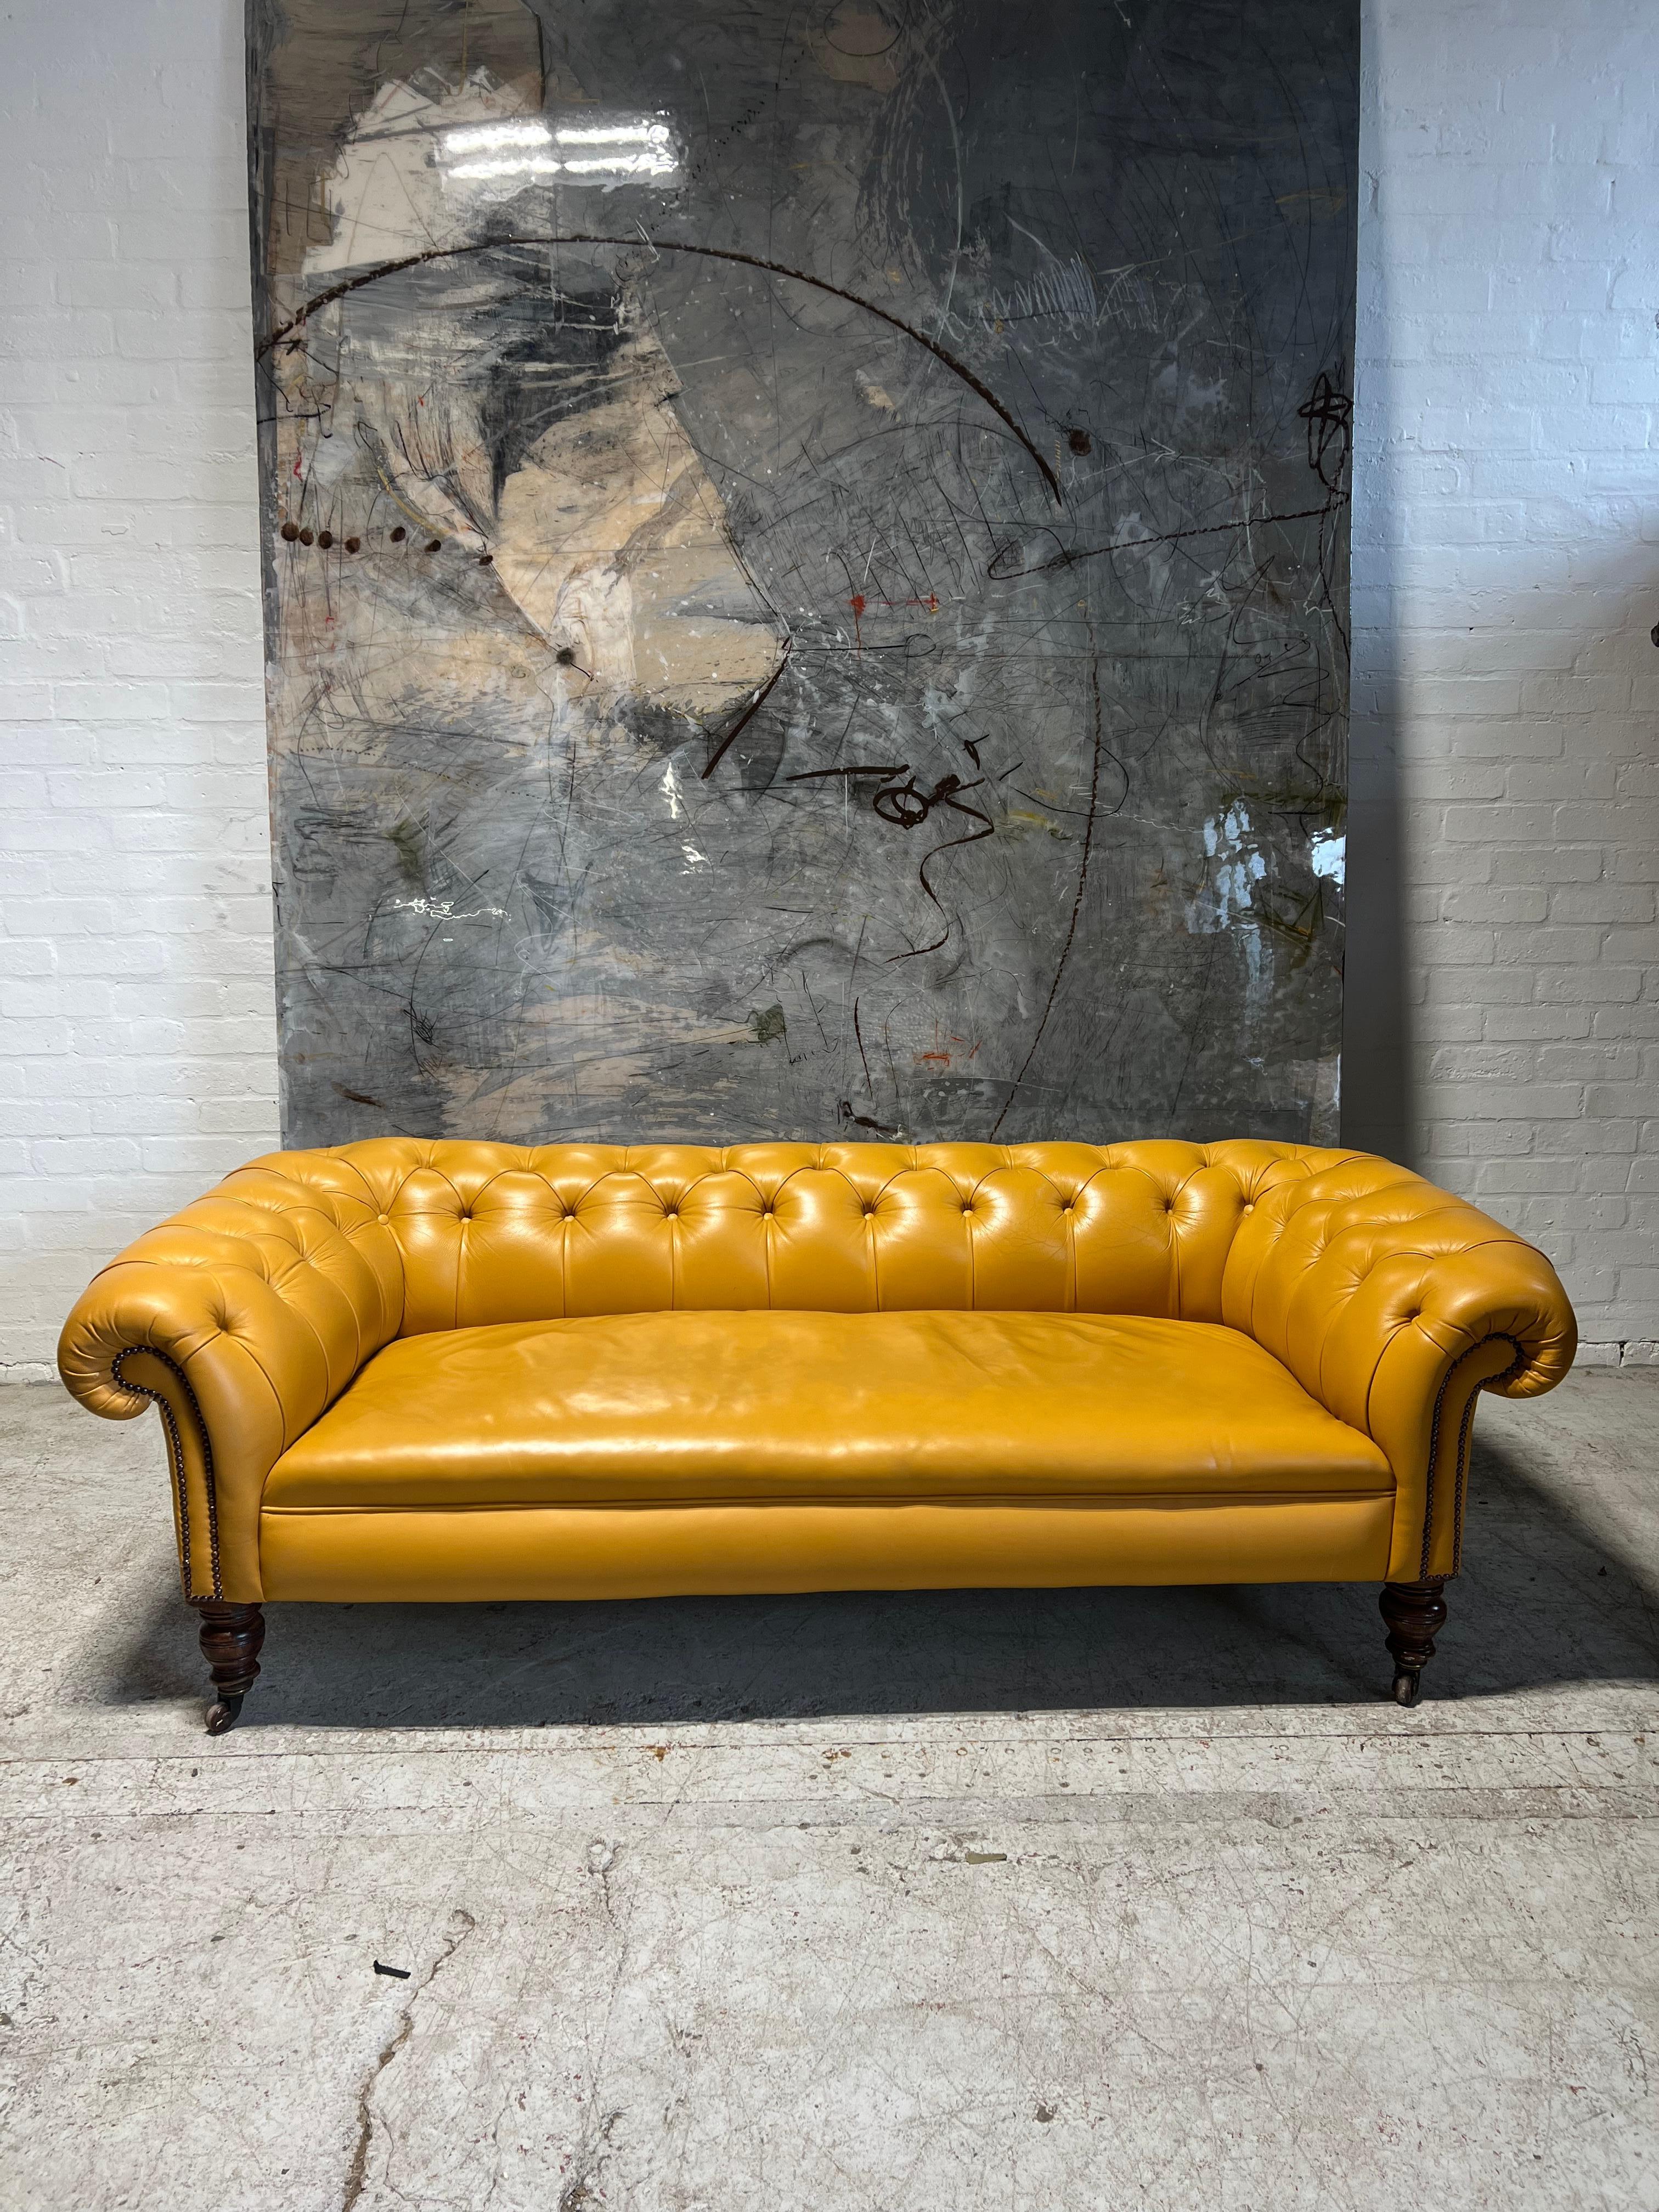 Antique 19thC Chesterfield Sofa in Stunning Sunflower Yellow Leather For Sale 1